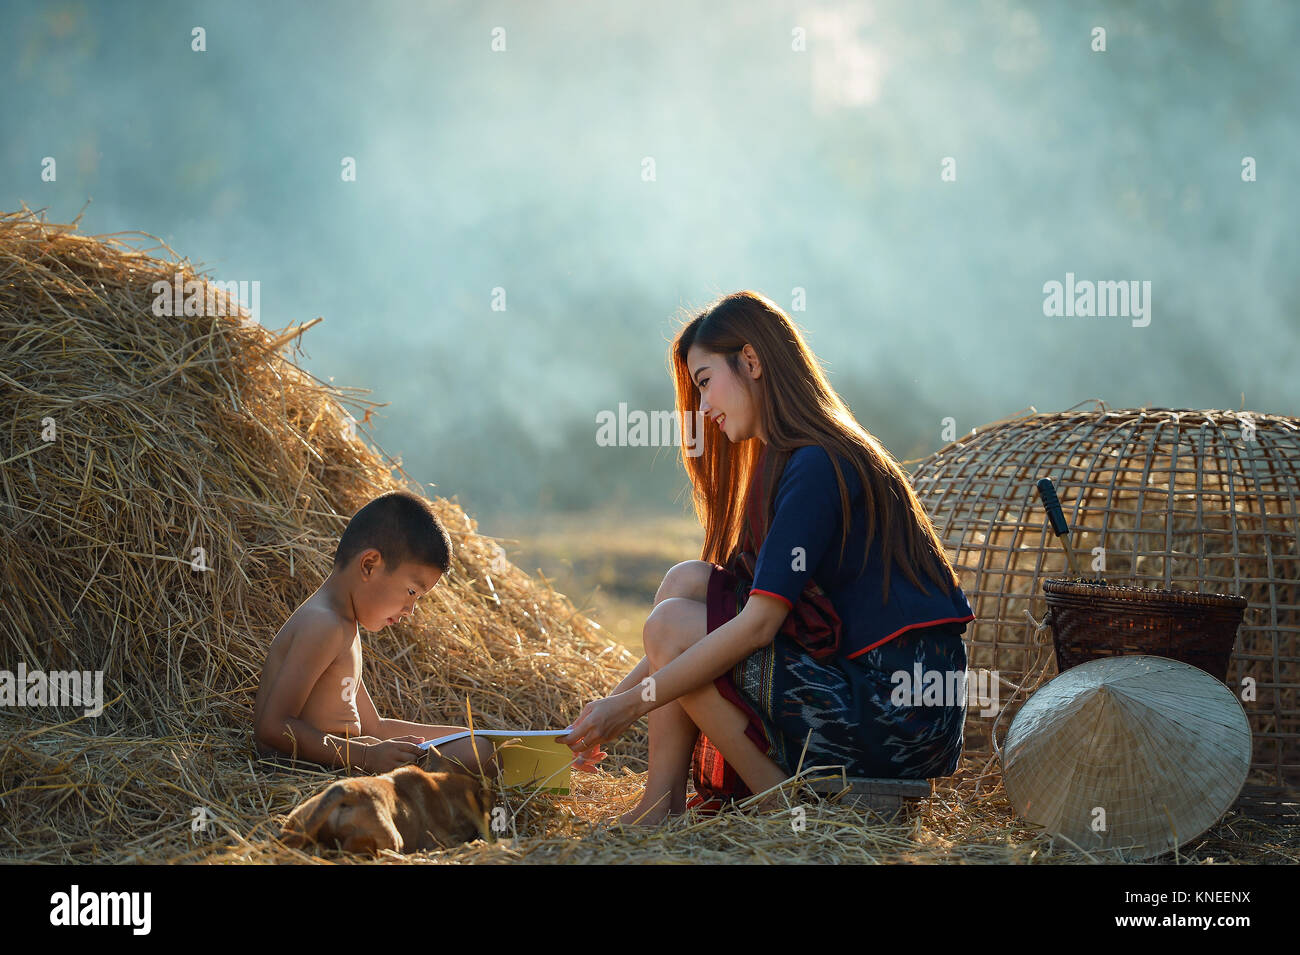 Woman and a boy reading a book together on a farm, Thailand Stock Photo